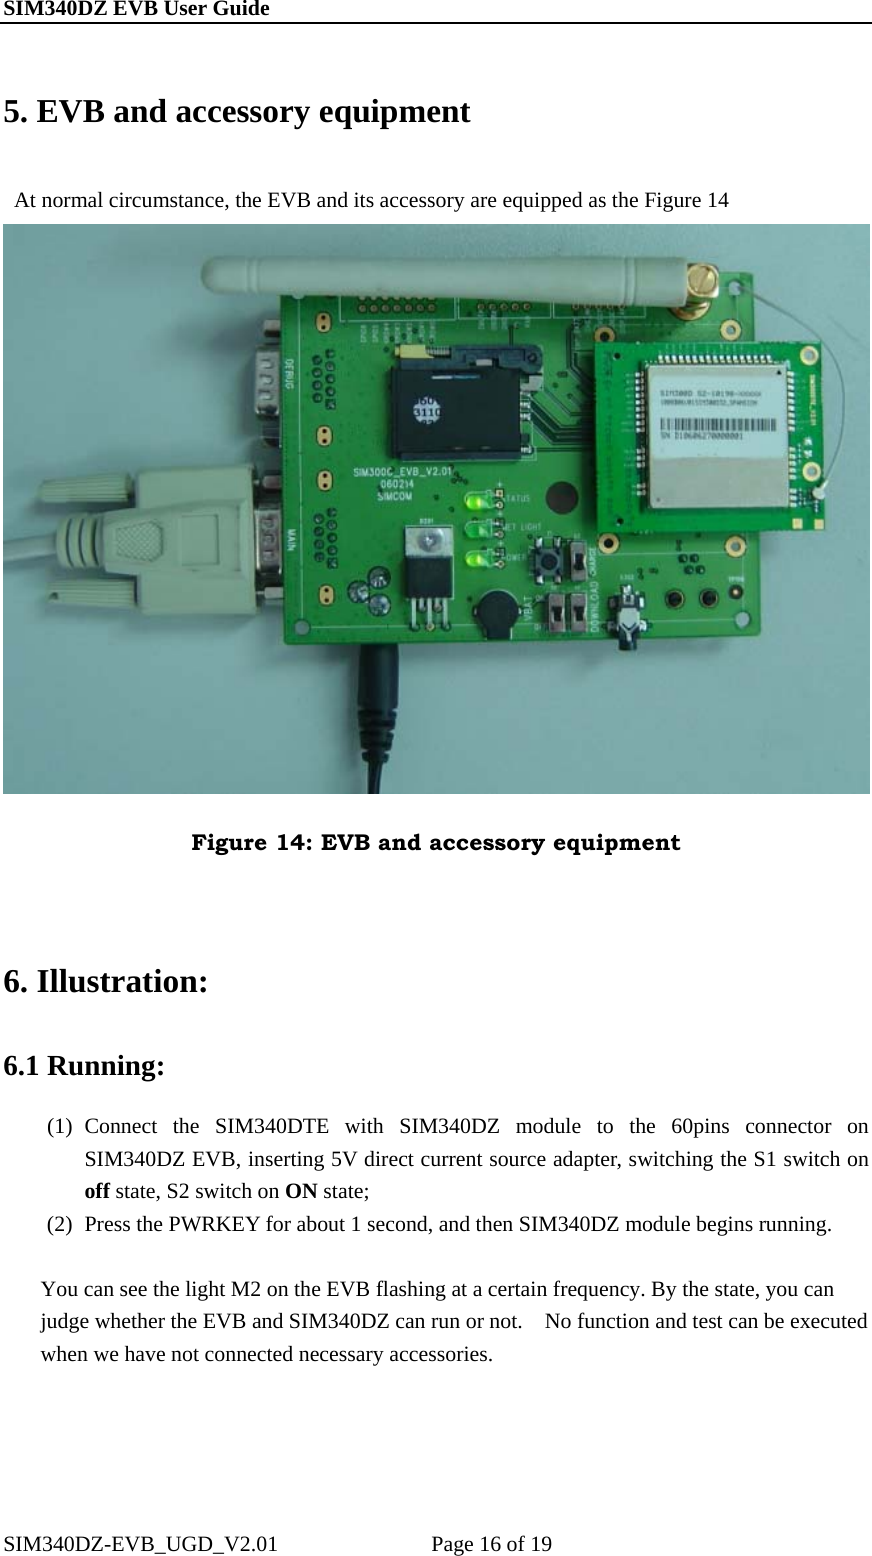 SIM340DZ EVB User Guide                                                       5. EVB and accessory equipment     At normal circumstance, the EVB and its accessory are equipped as the Figure 14    Figure 14: EVB and accessory equipment  6. Illustration: 6.1 Running: (1) Connect the SIM340DTE with SIM340DZ module to the 60pins connector on SIM340DZ EVB, inserting 5V direct current source adapter, switching the S1 switch on off state, S2 switch on ON state; (2) Press the PWRKEY for about 1 second, and then SIM340DZ module begins running.  You can see the light M2 on the EVB flashing at a certain frequency. By the state, you can judge whether the EVB and SIM340DZ can run or not.    No function and test can be executed when we have not connected necessary accessories.  SIM340DZ-EVB_UGD_V2.01              Page 16 of 19 